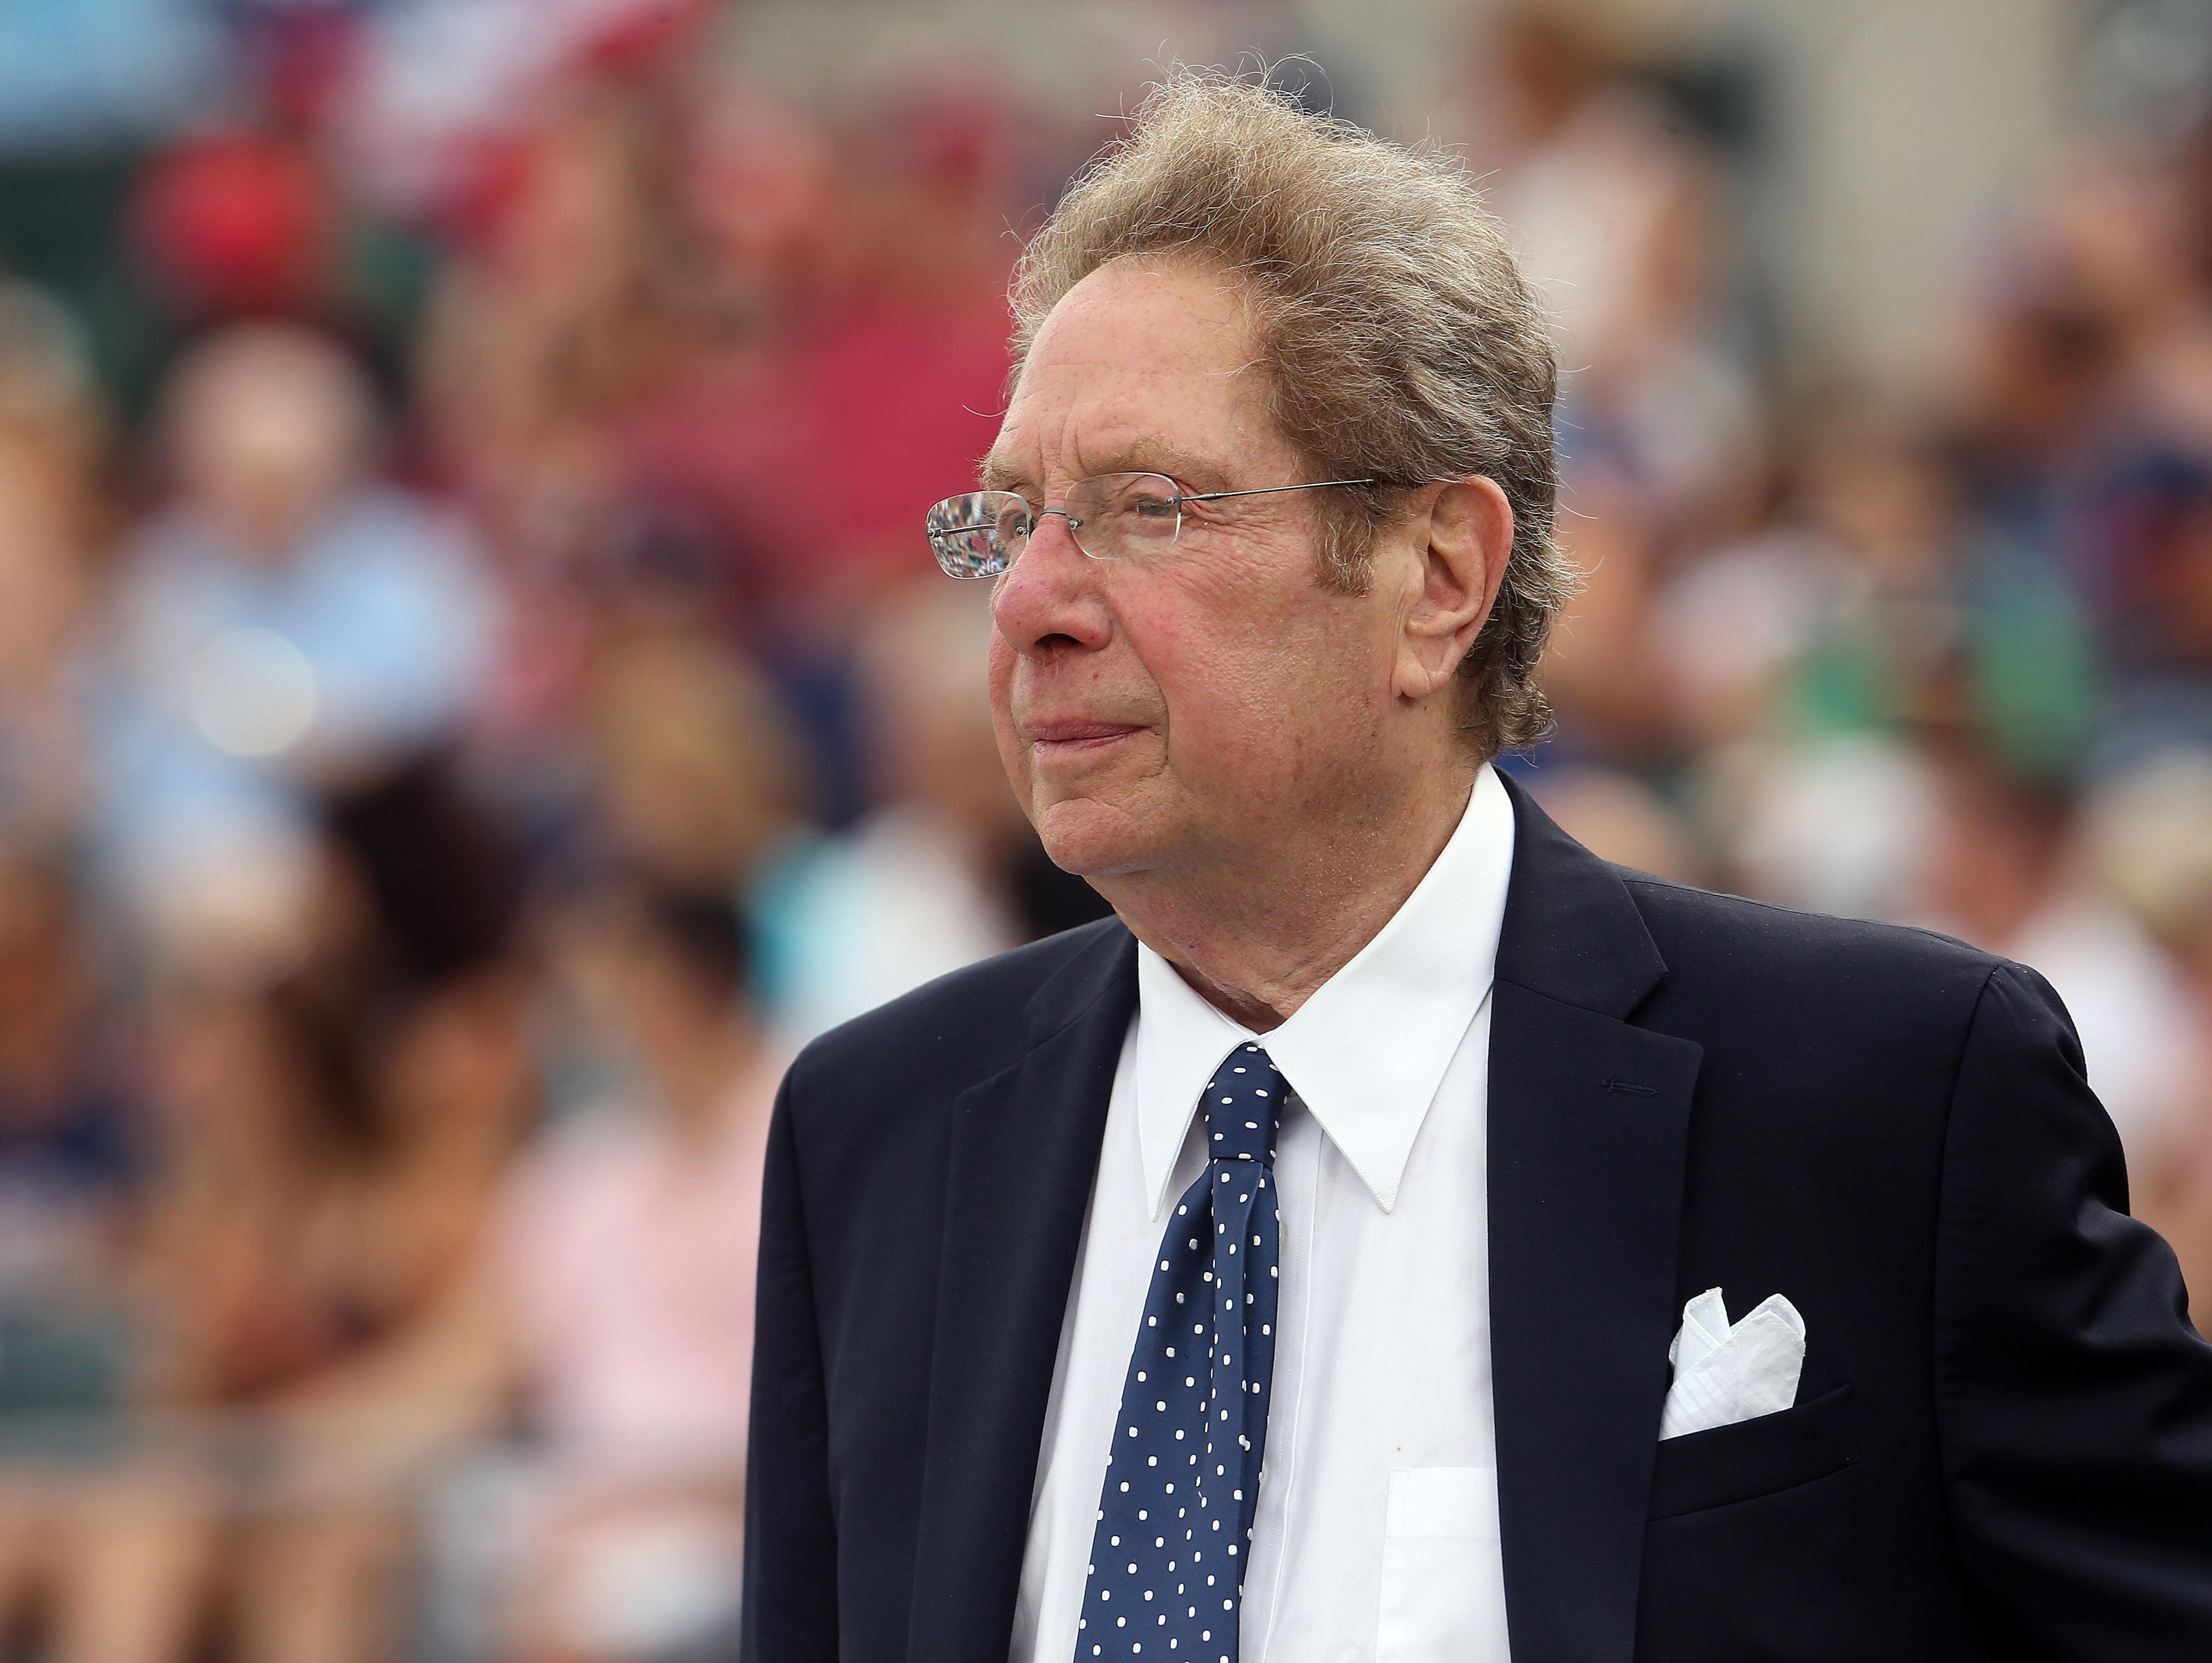 john sterling, yankees' legendary broadcaster, has decided to call it a career